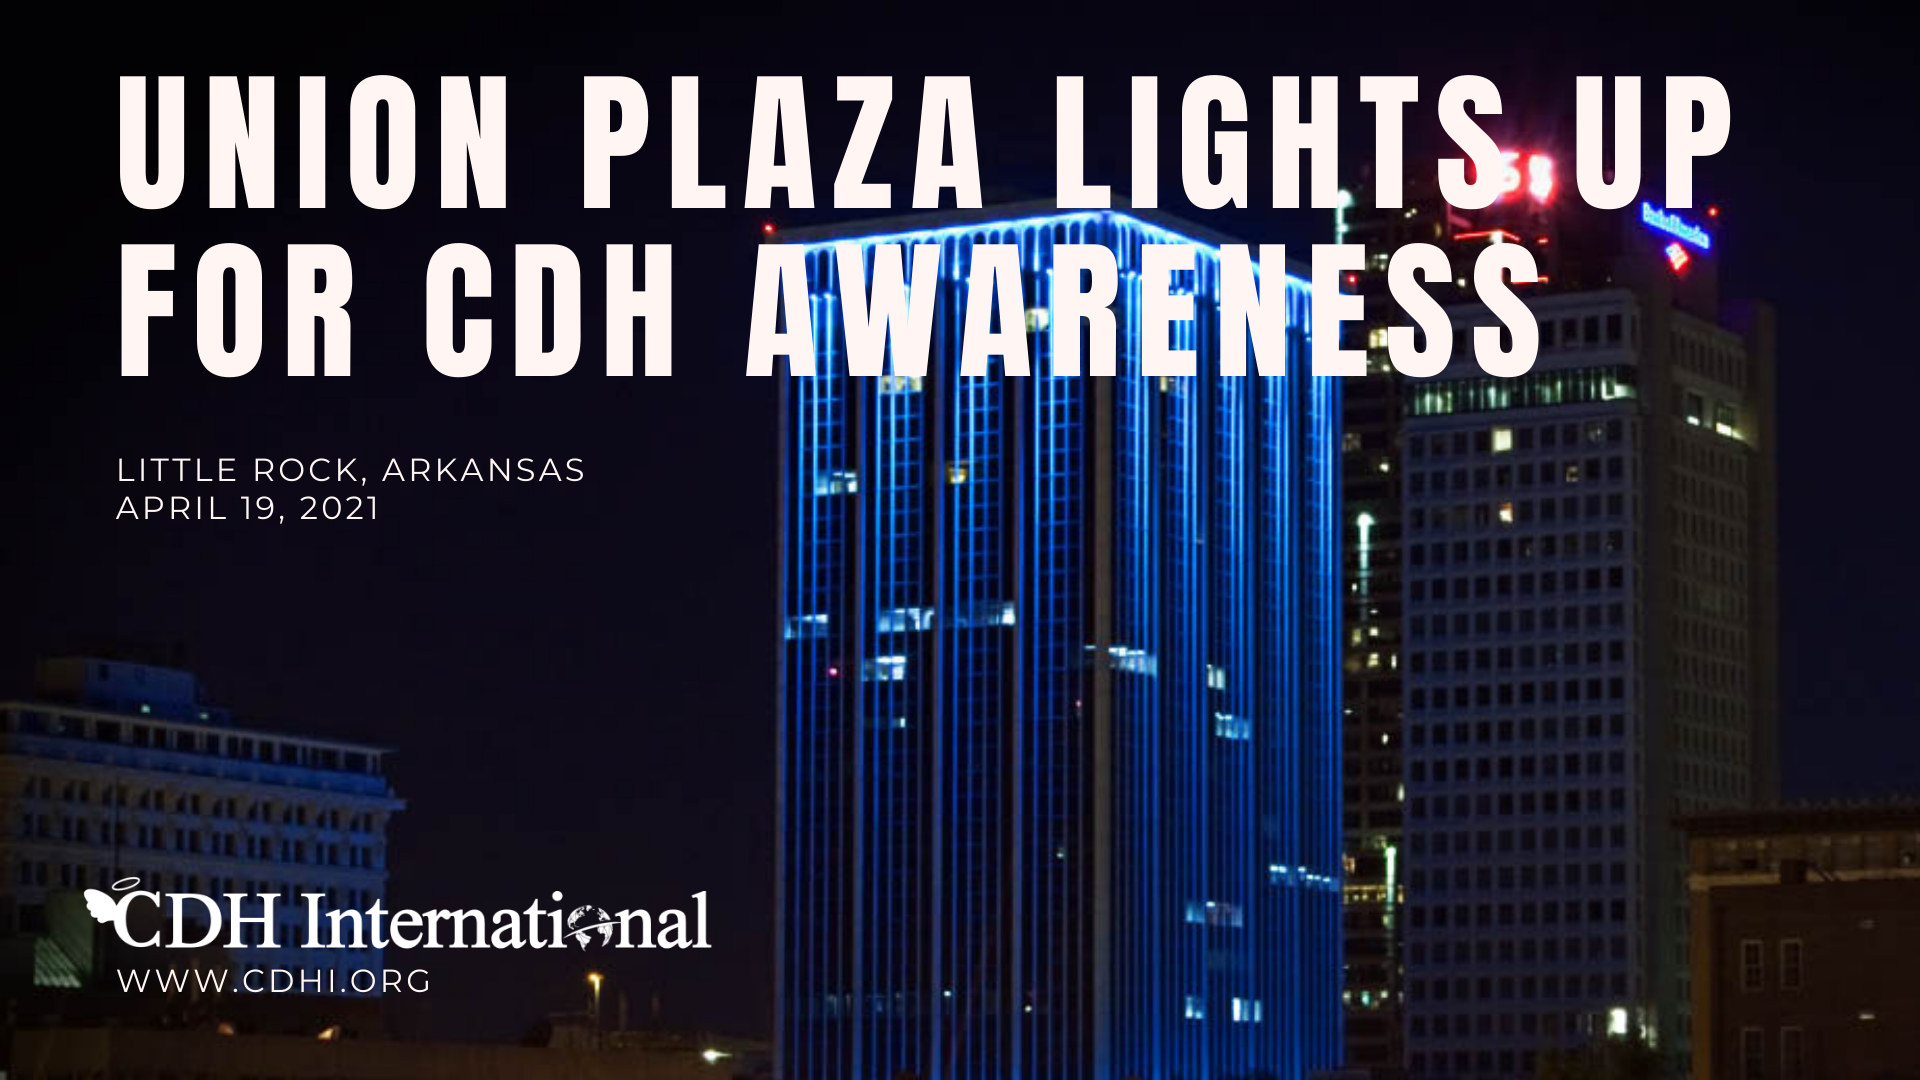 The Retirement Systems of Montgomery, Alabama Lights Up For CDH Awareness